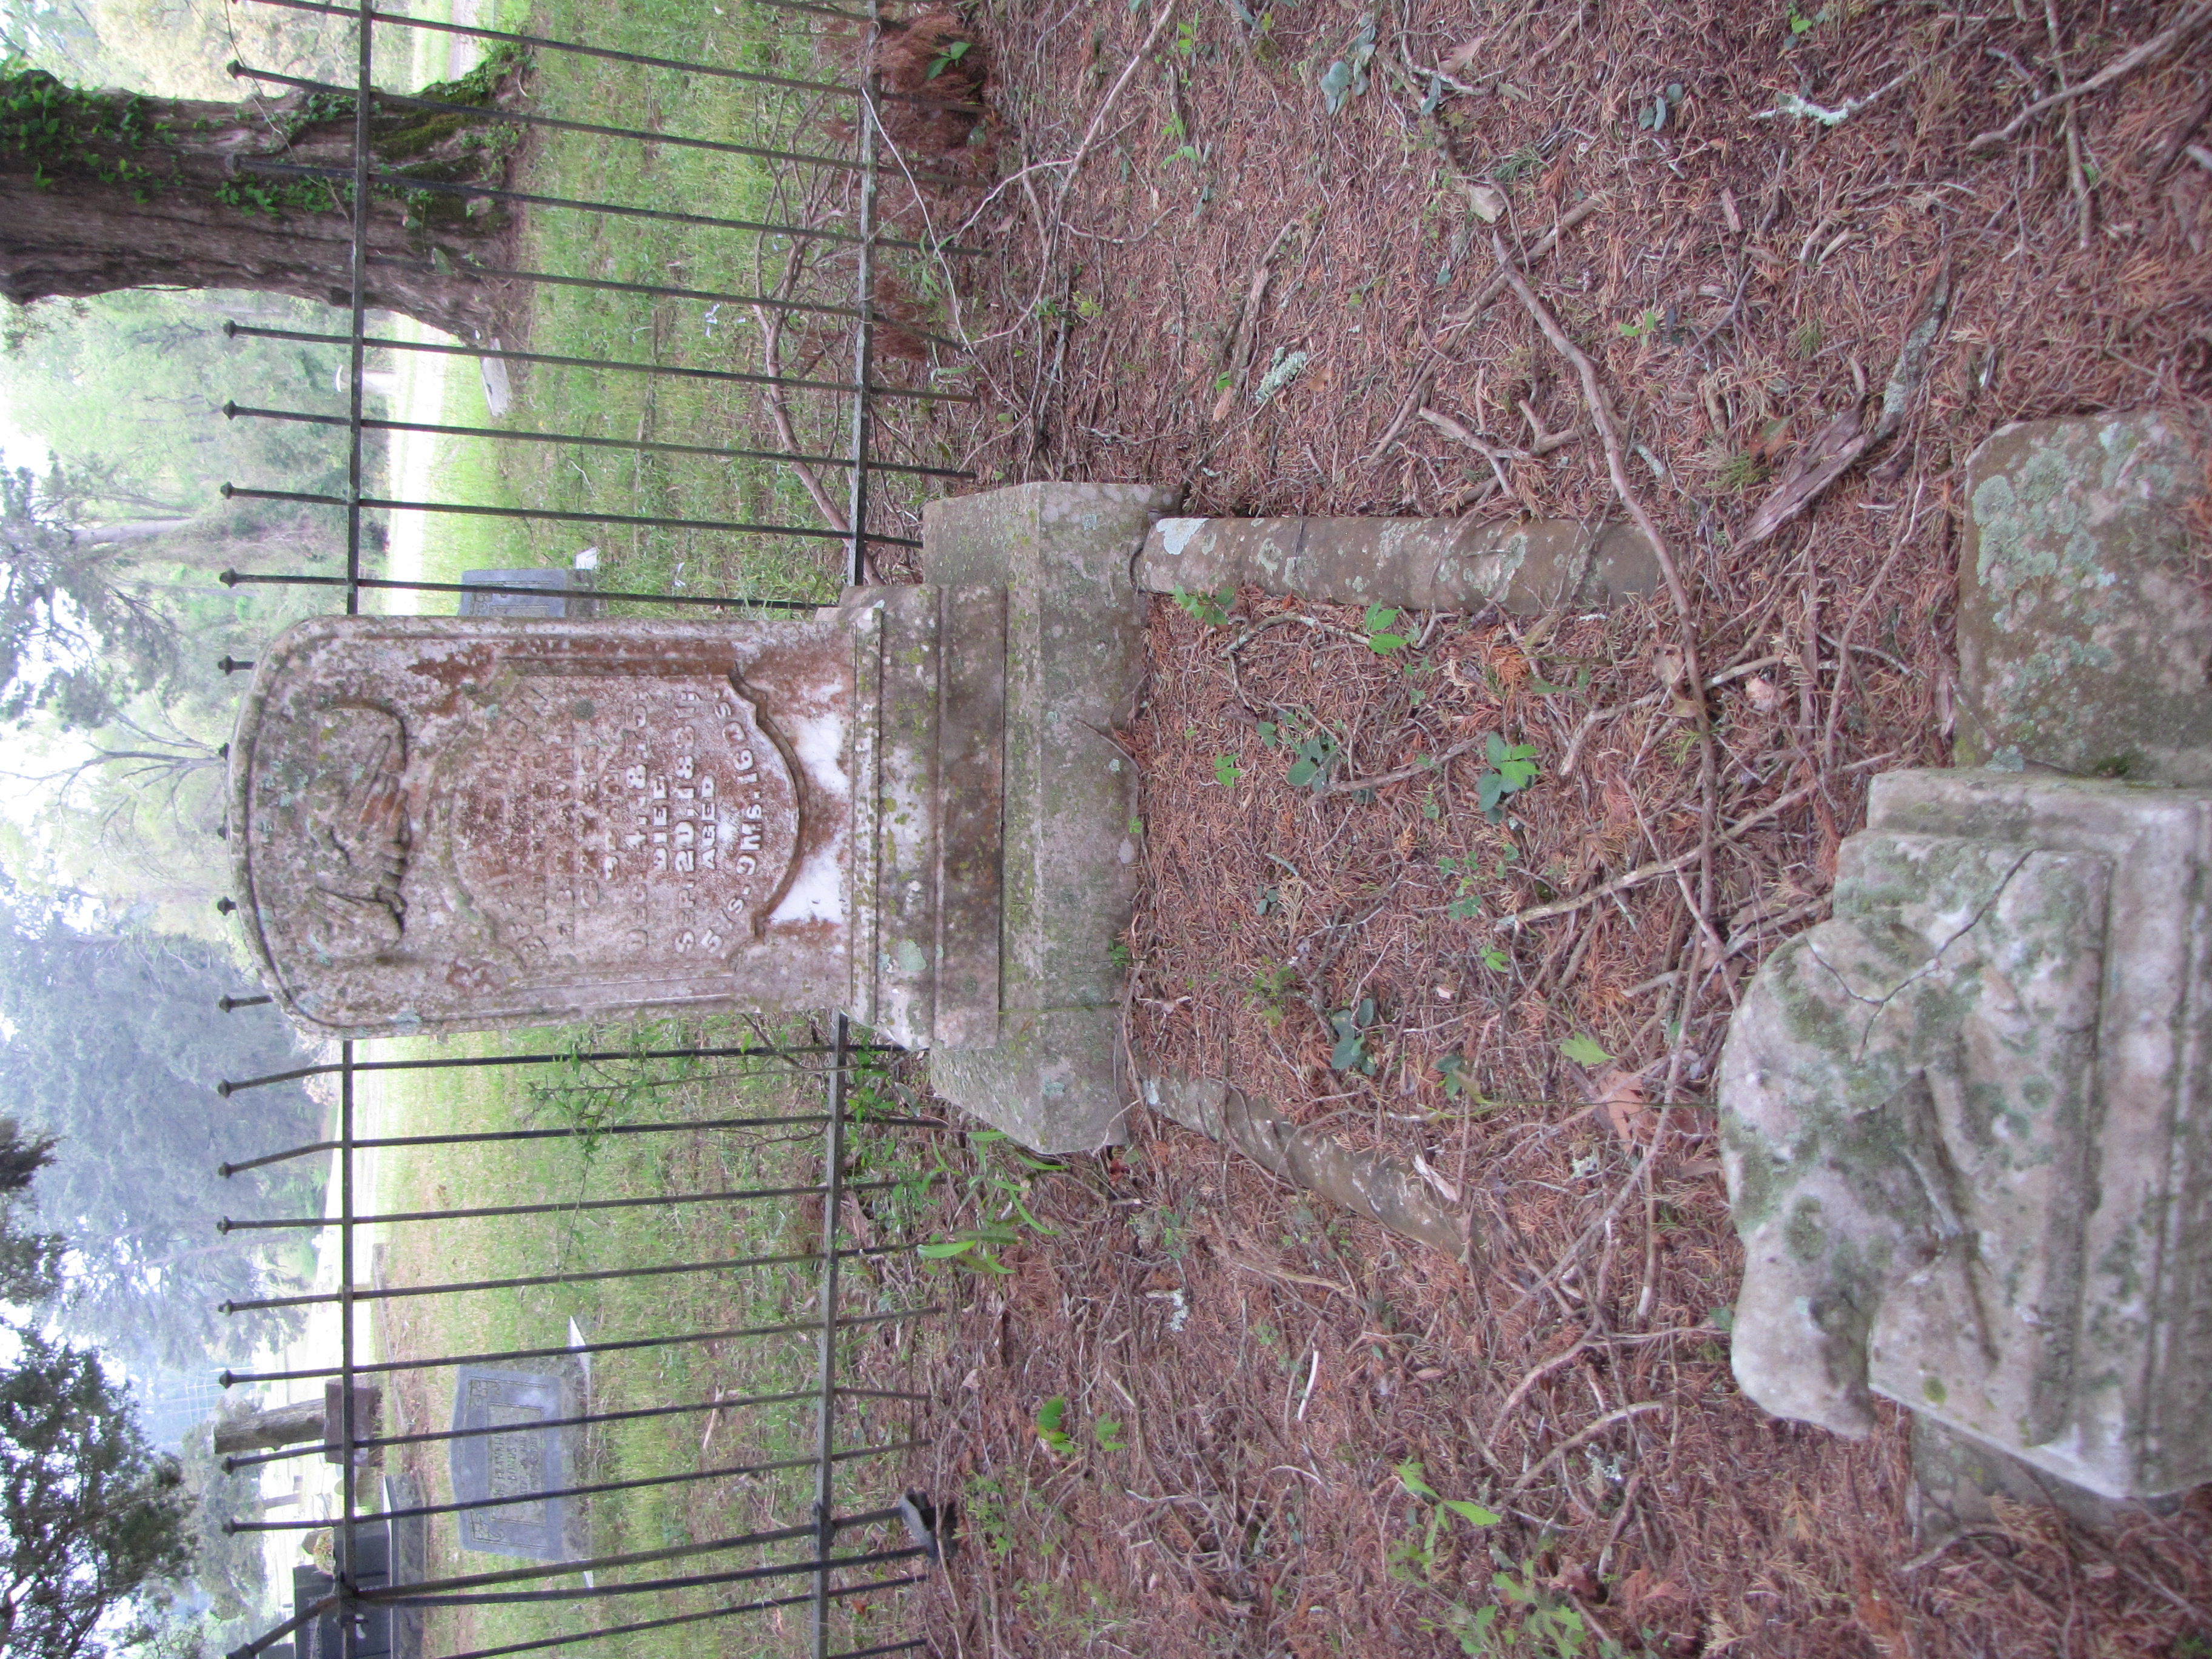 image of a marble marker with headstone and footstone. The footstone is of a lamb.